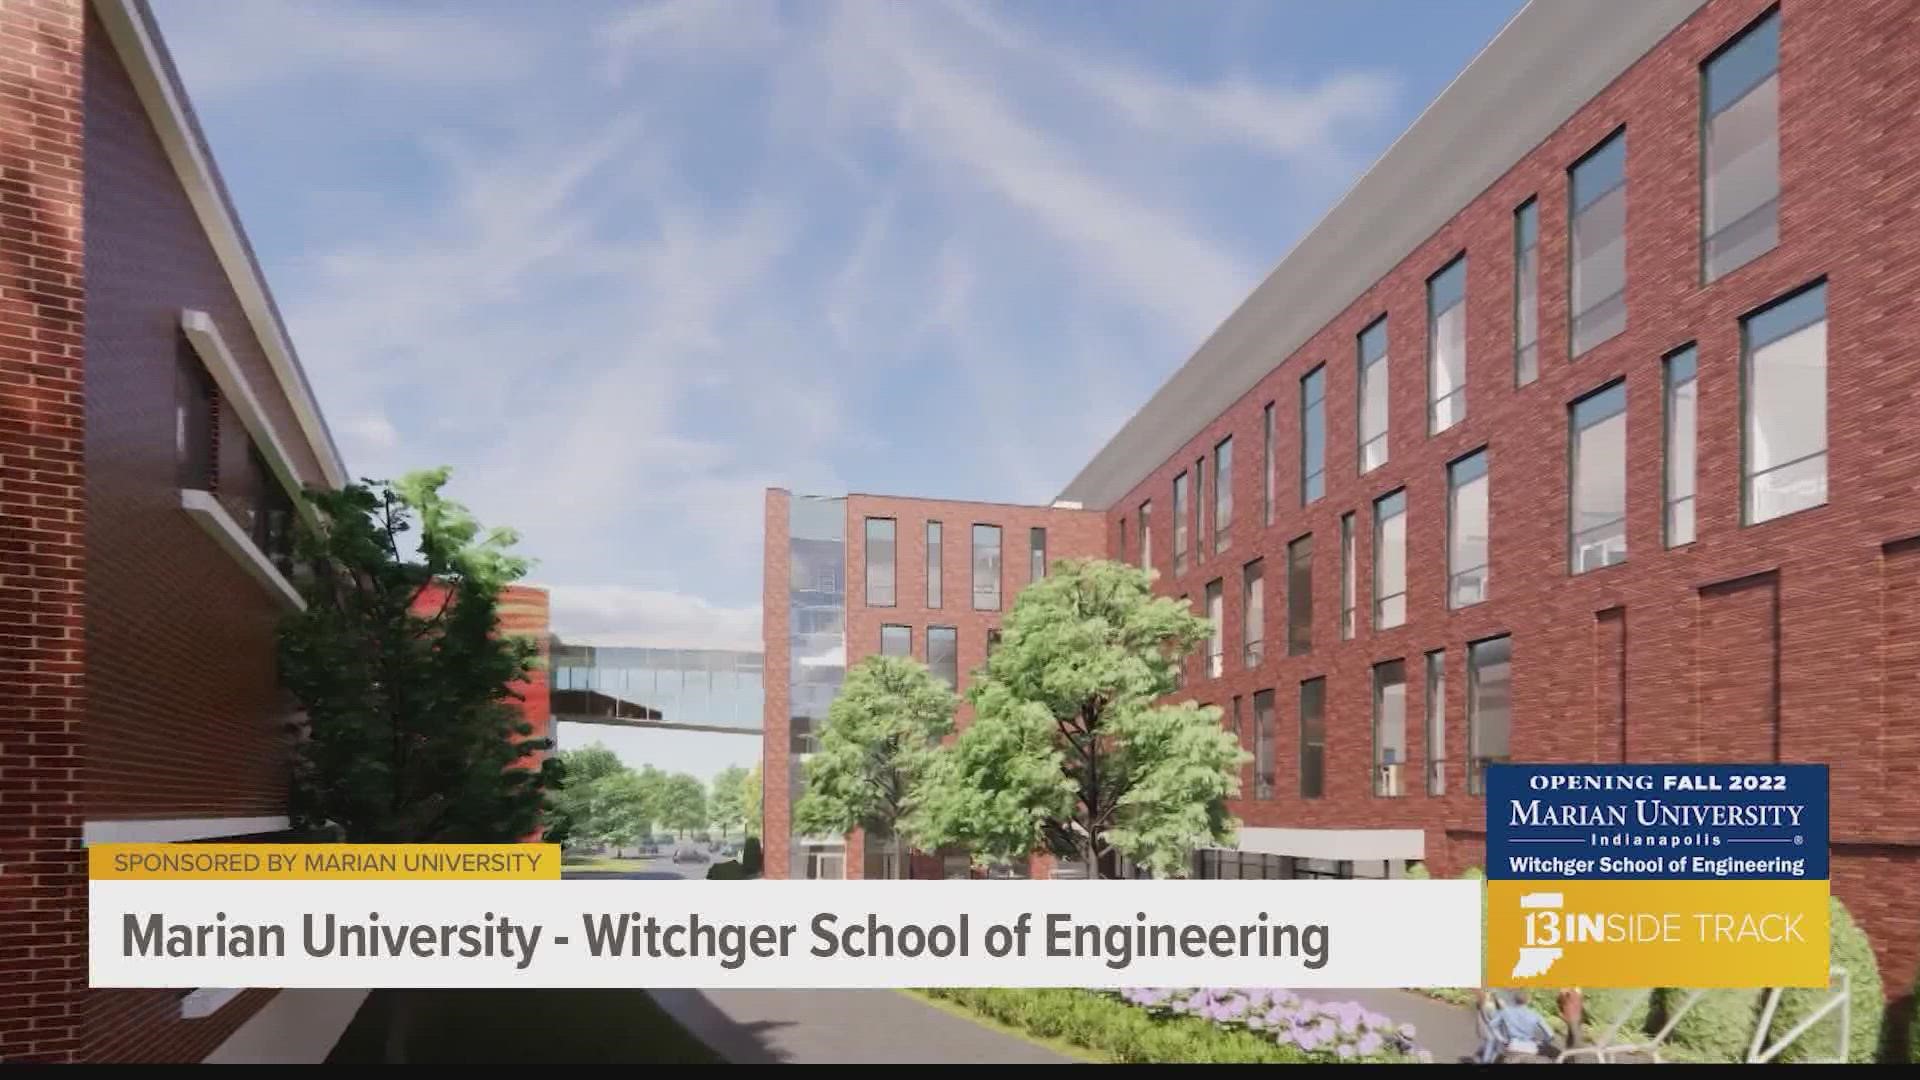 Marian University's new Witchger School of Engineering is scheduled to open Fall 2022.